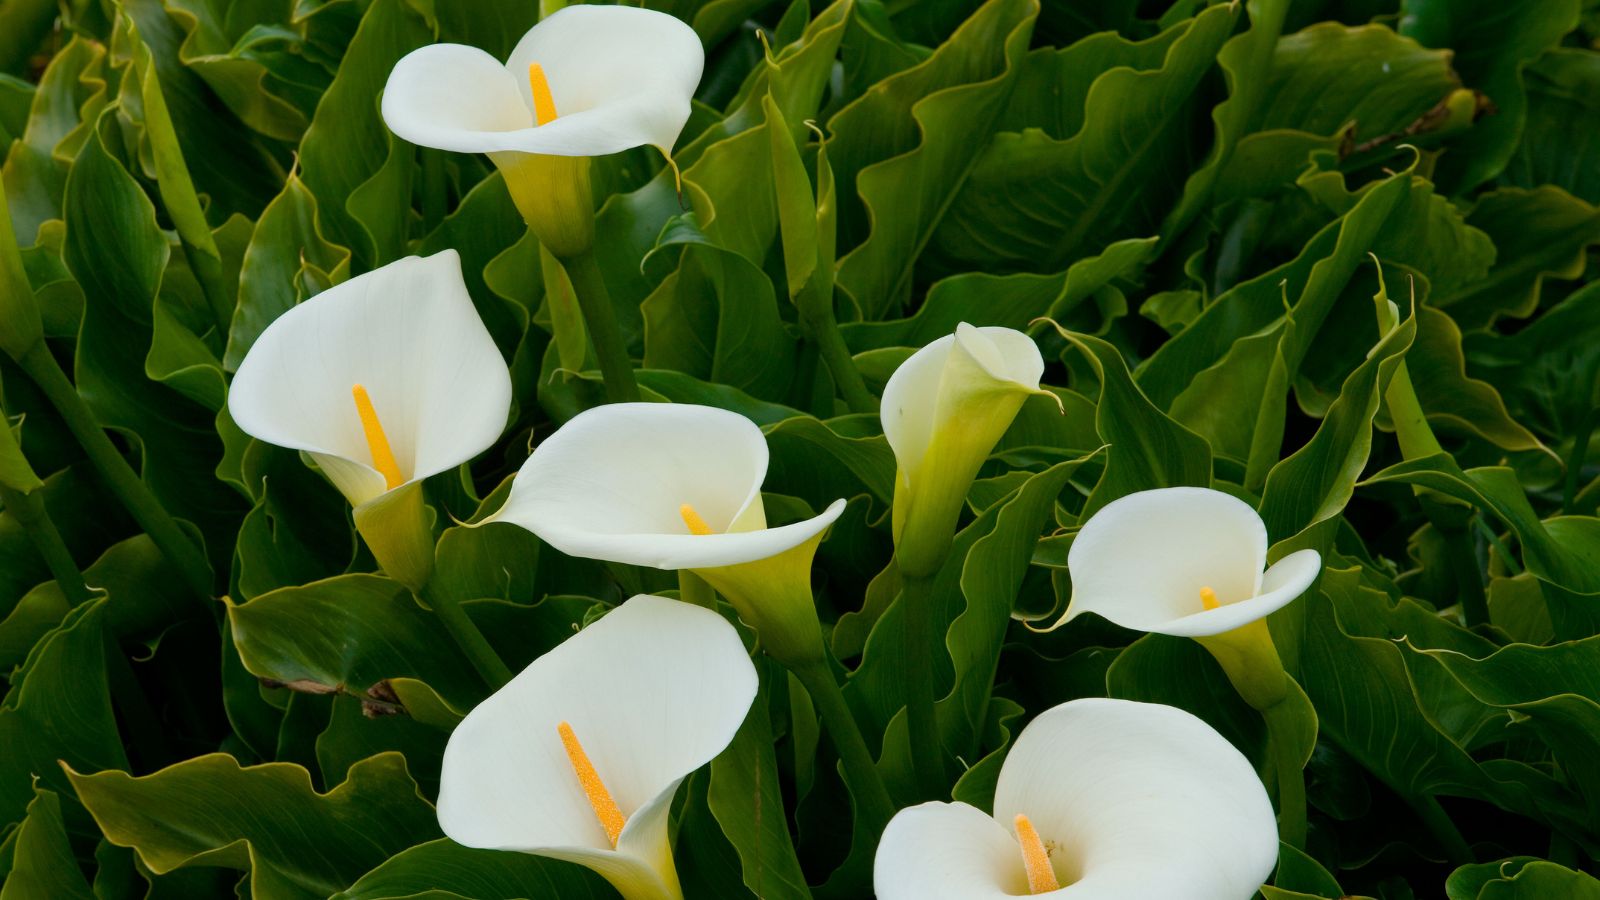 When to cut back calla lilies – 3 signs for healthier, longer-lasting blooms